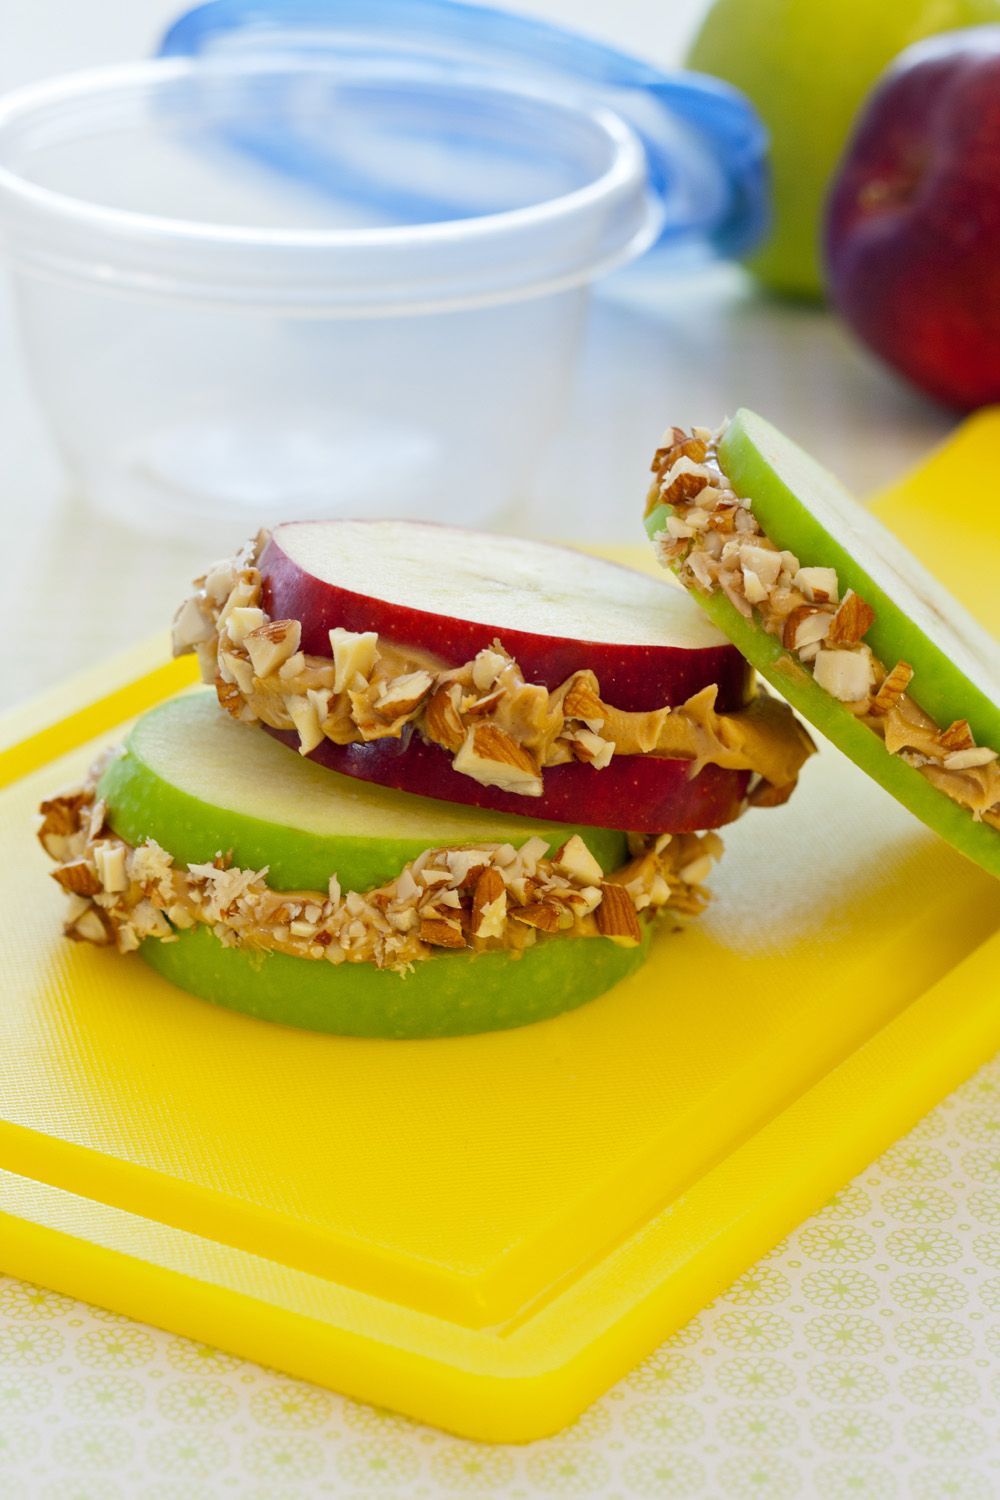 Get crunchy with lunch & snacks!  Mix up granola and peanut butter and sprea